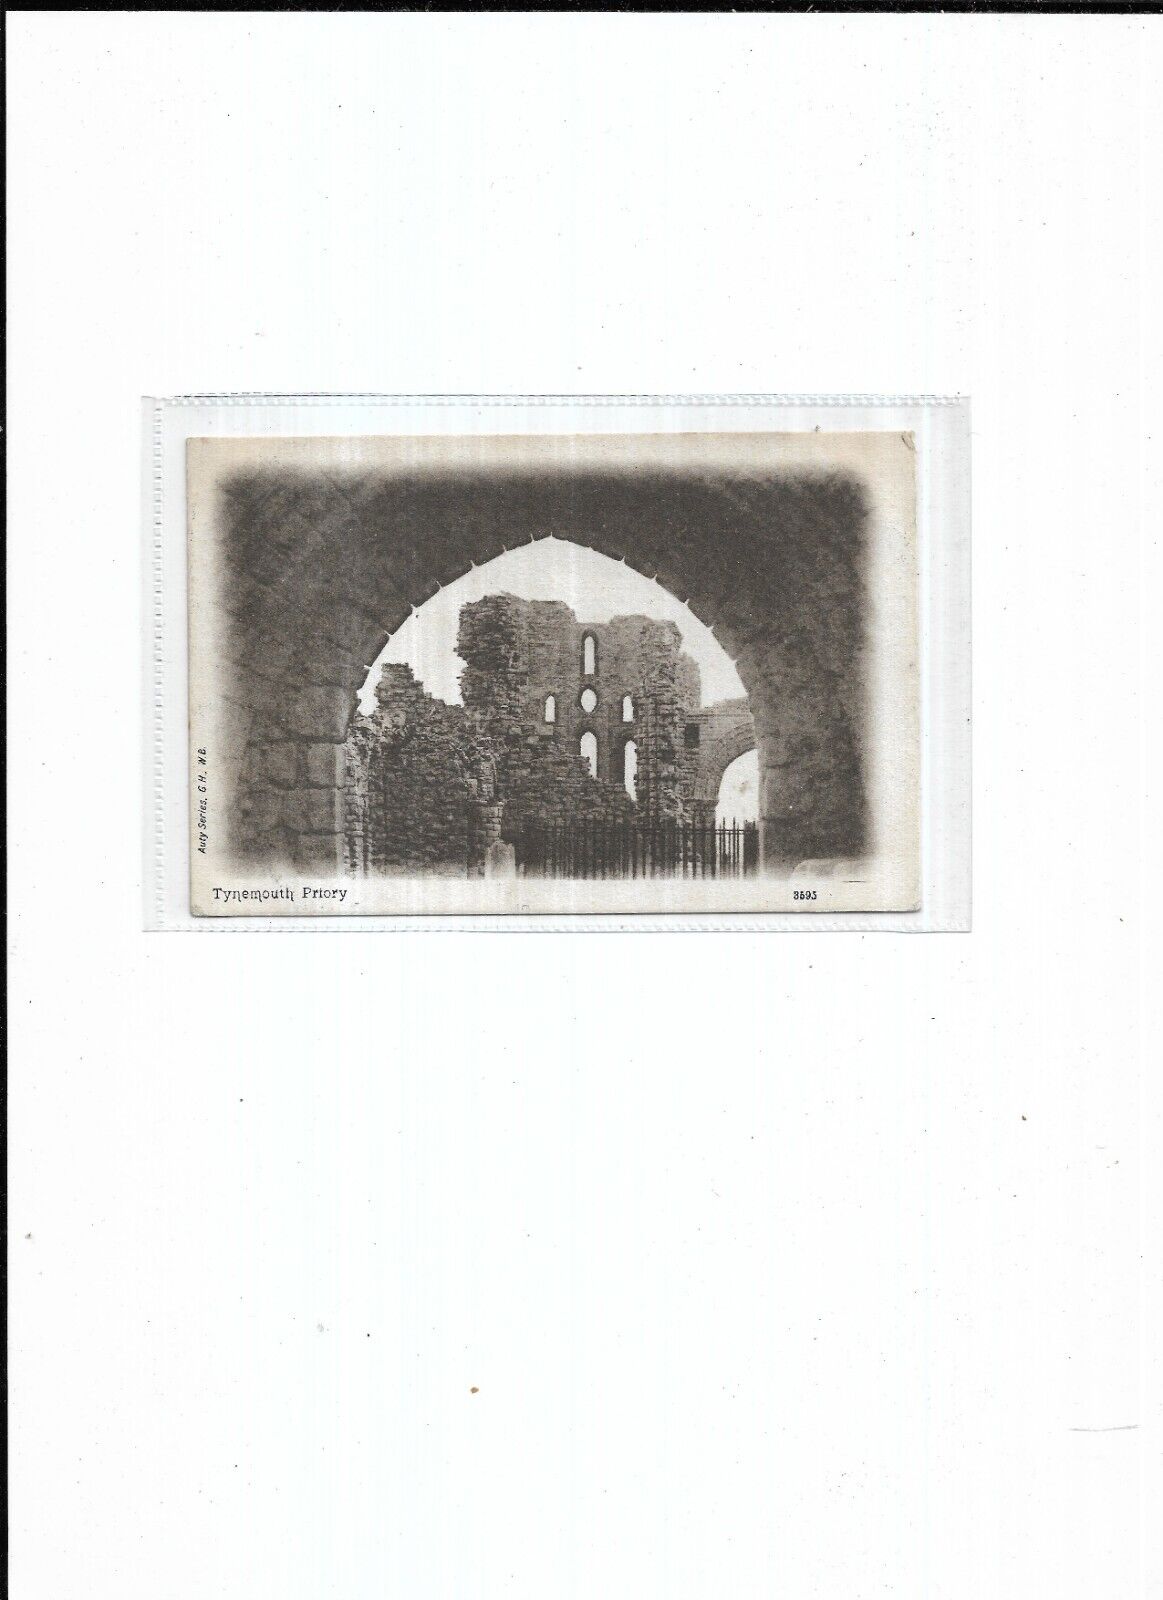 House Clearance - Northumberland Service 3595 "Tynemouth Priory"  Postmarked 1907?